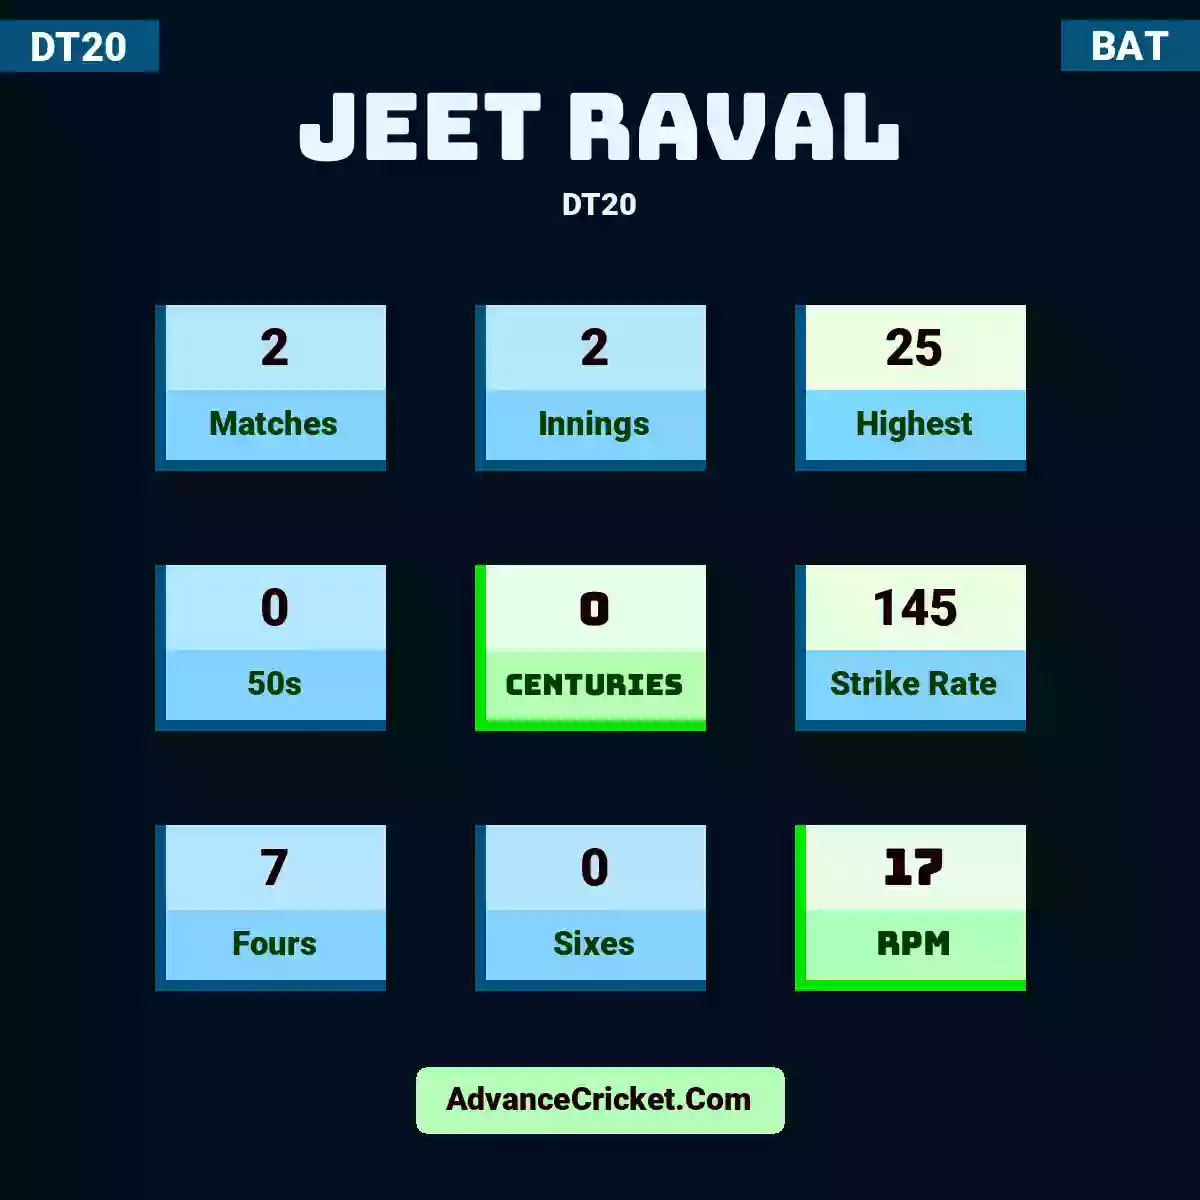 Jeet Raval DT20 , Jeet Raval played 2 matches, scored 25 runs as highest, 0 half-centuries, and 0 centuries, with a strike rate of 145. J.Raval hit 7 fours and 0 sixes, with an RPM of 17.